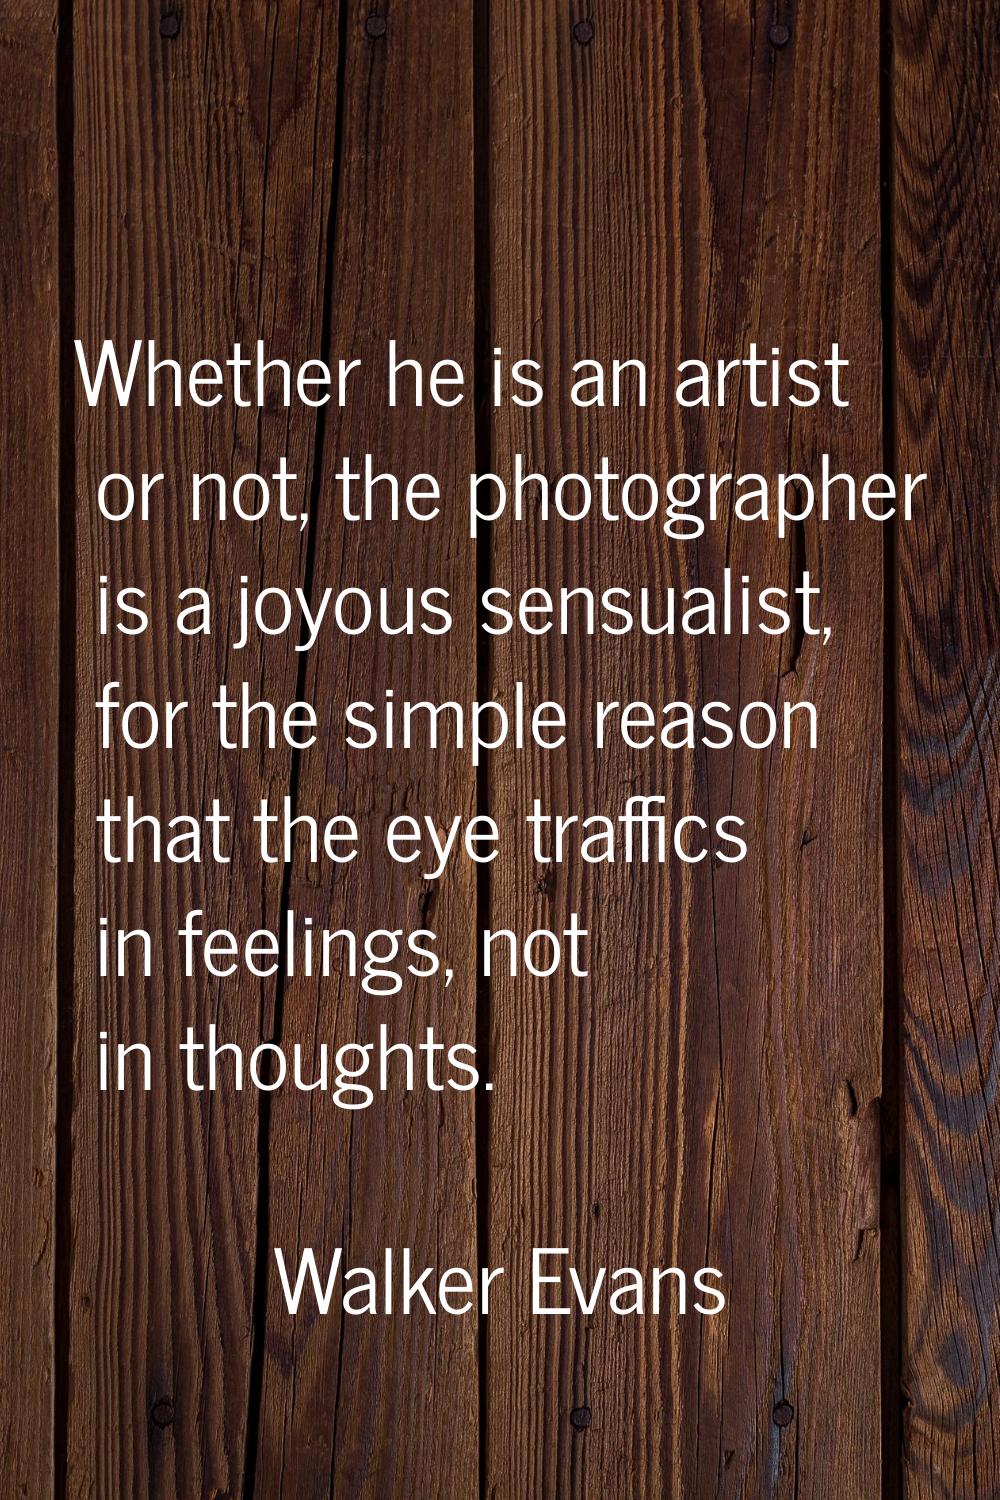 Whether he is an artist or not, the photographer is a joyous sensualist, for the simple reason that